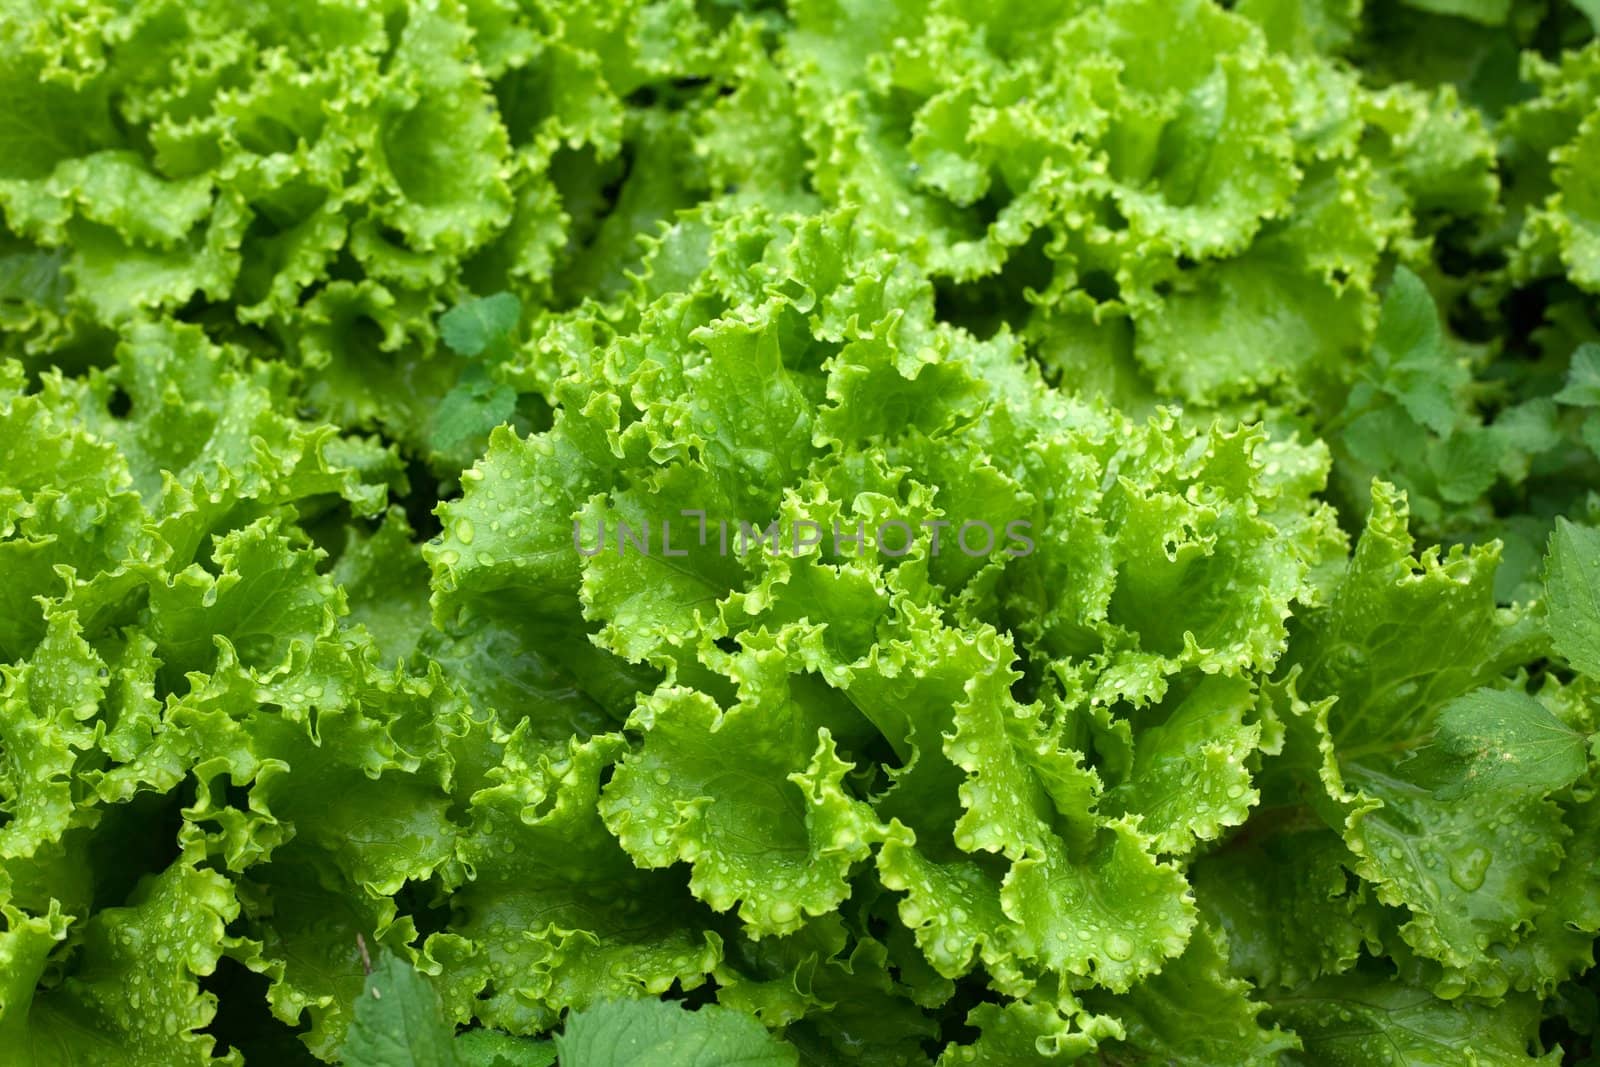 An image of fresh green lettuce close-up